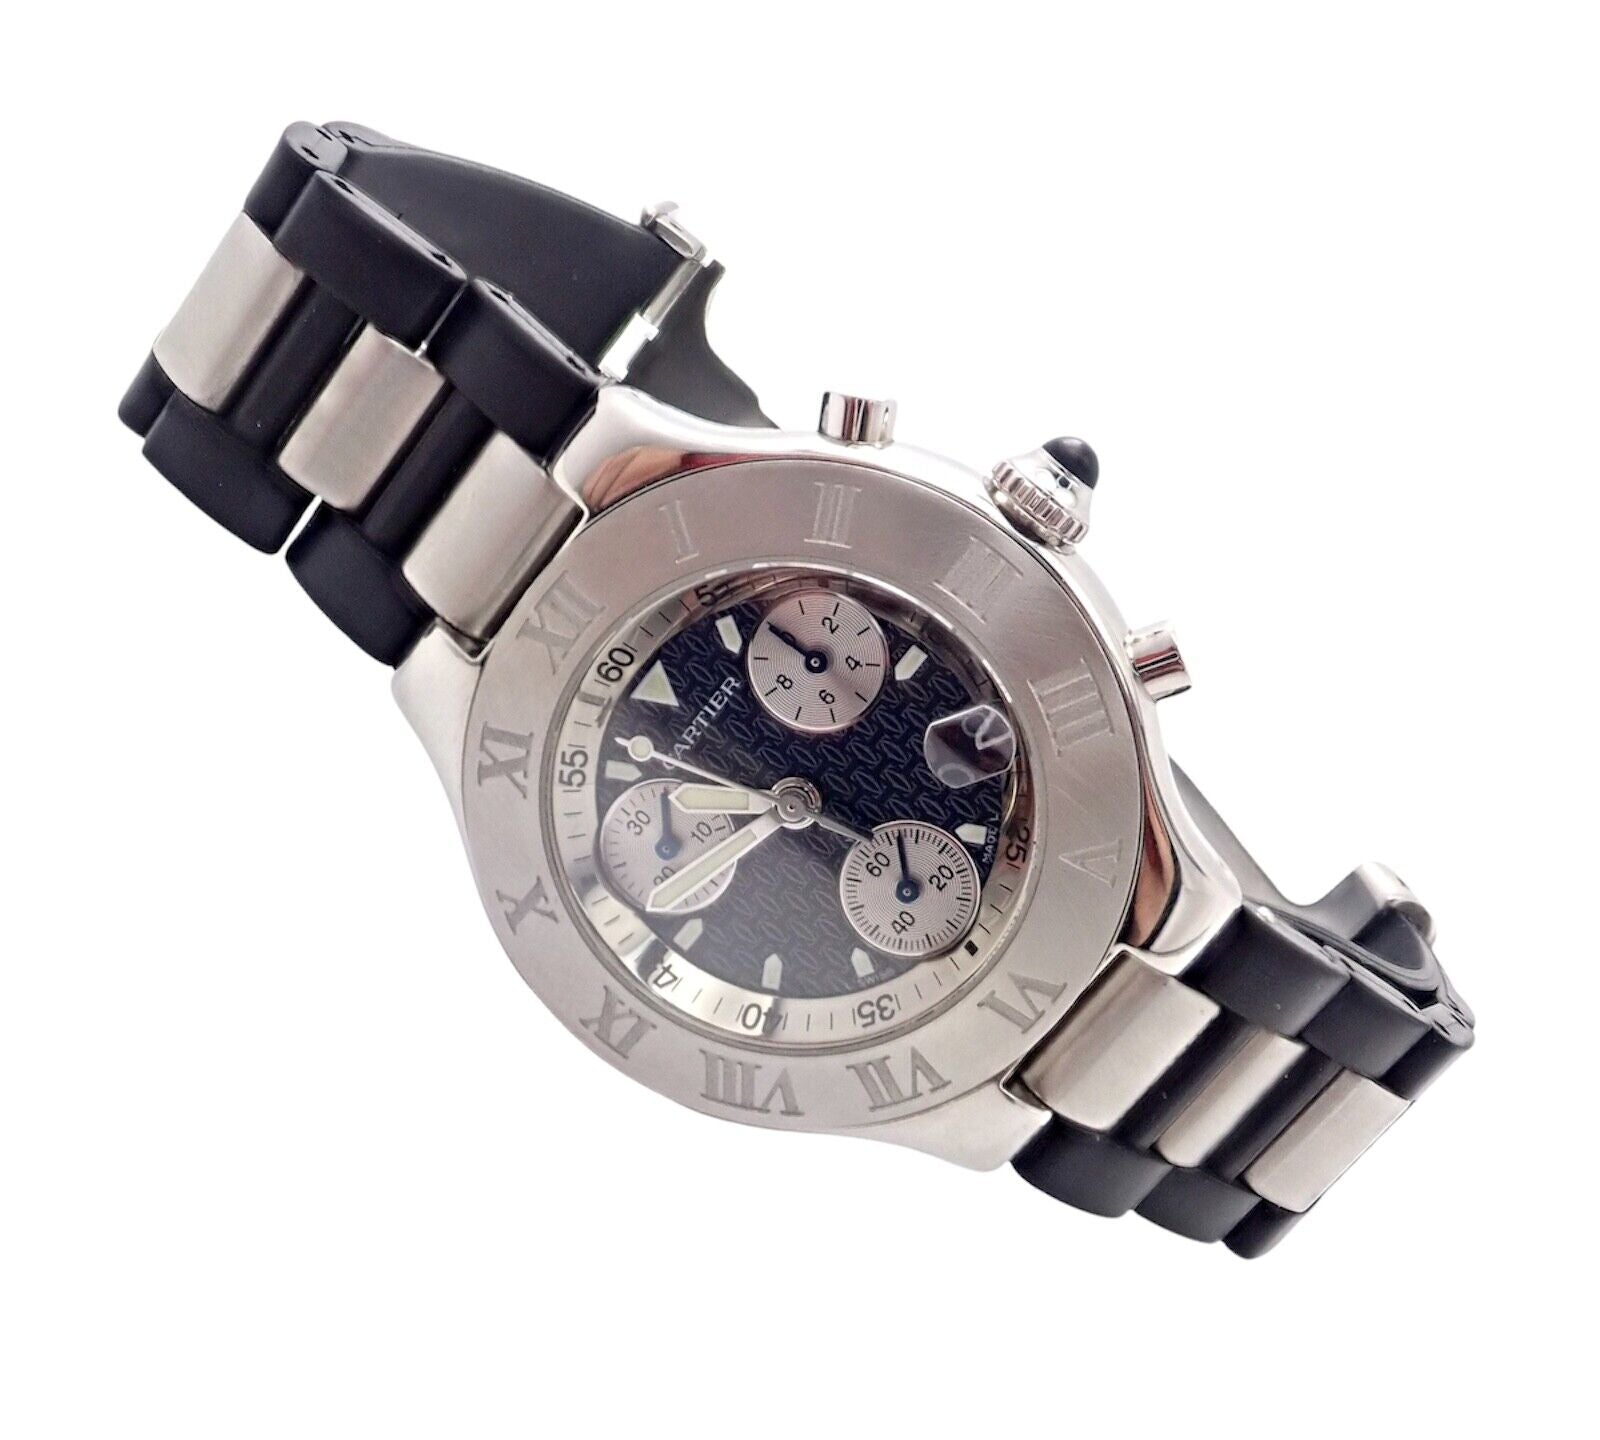 Cartier Jewelry & Watches:Watches, Parts & Accessories:Watches:Wristwatches Authentic! Cartier Stainless Steel Chronograph 21 Quartz Rubber Band Watch